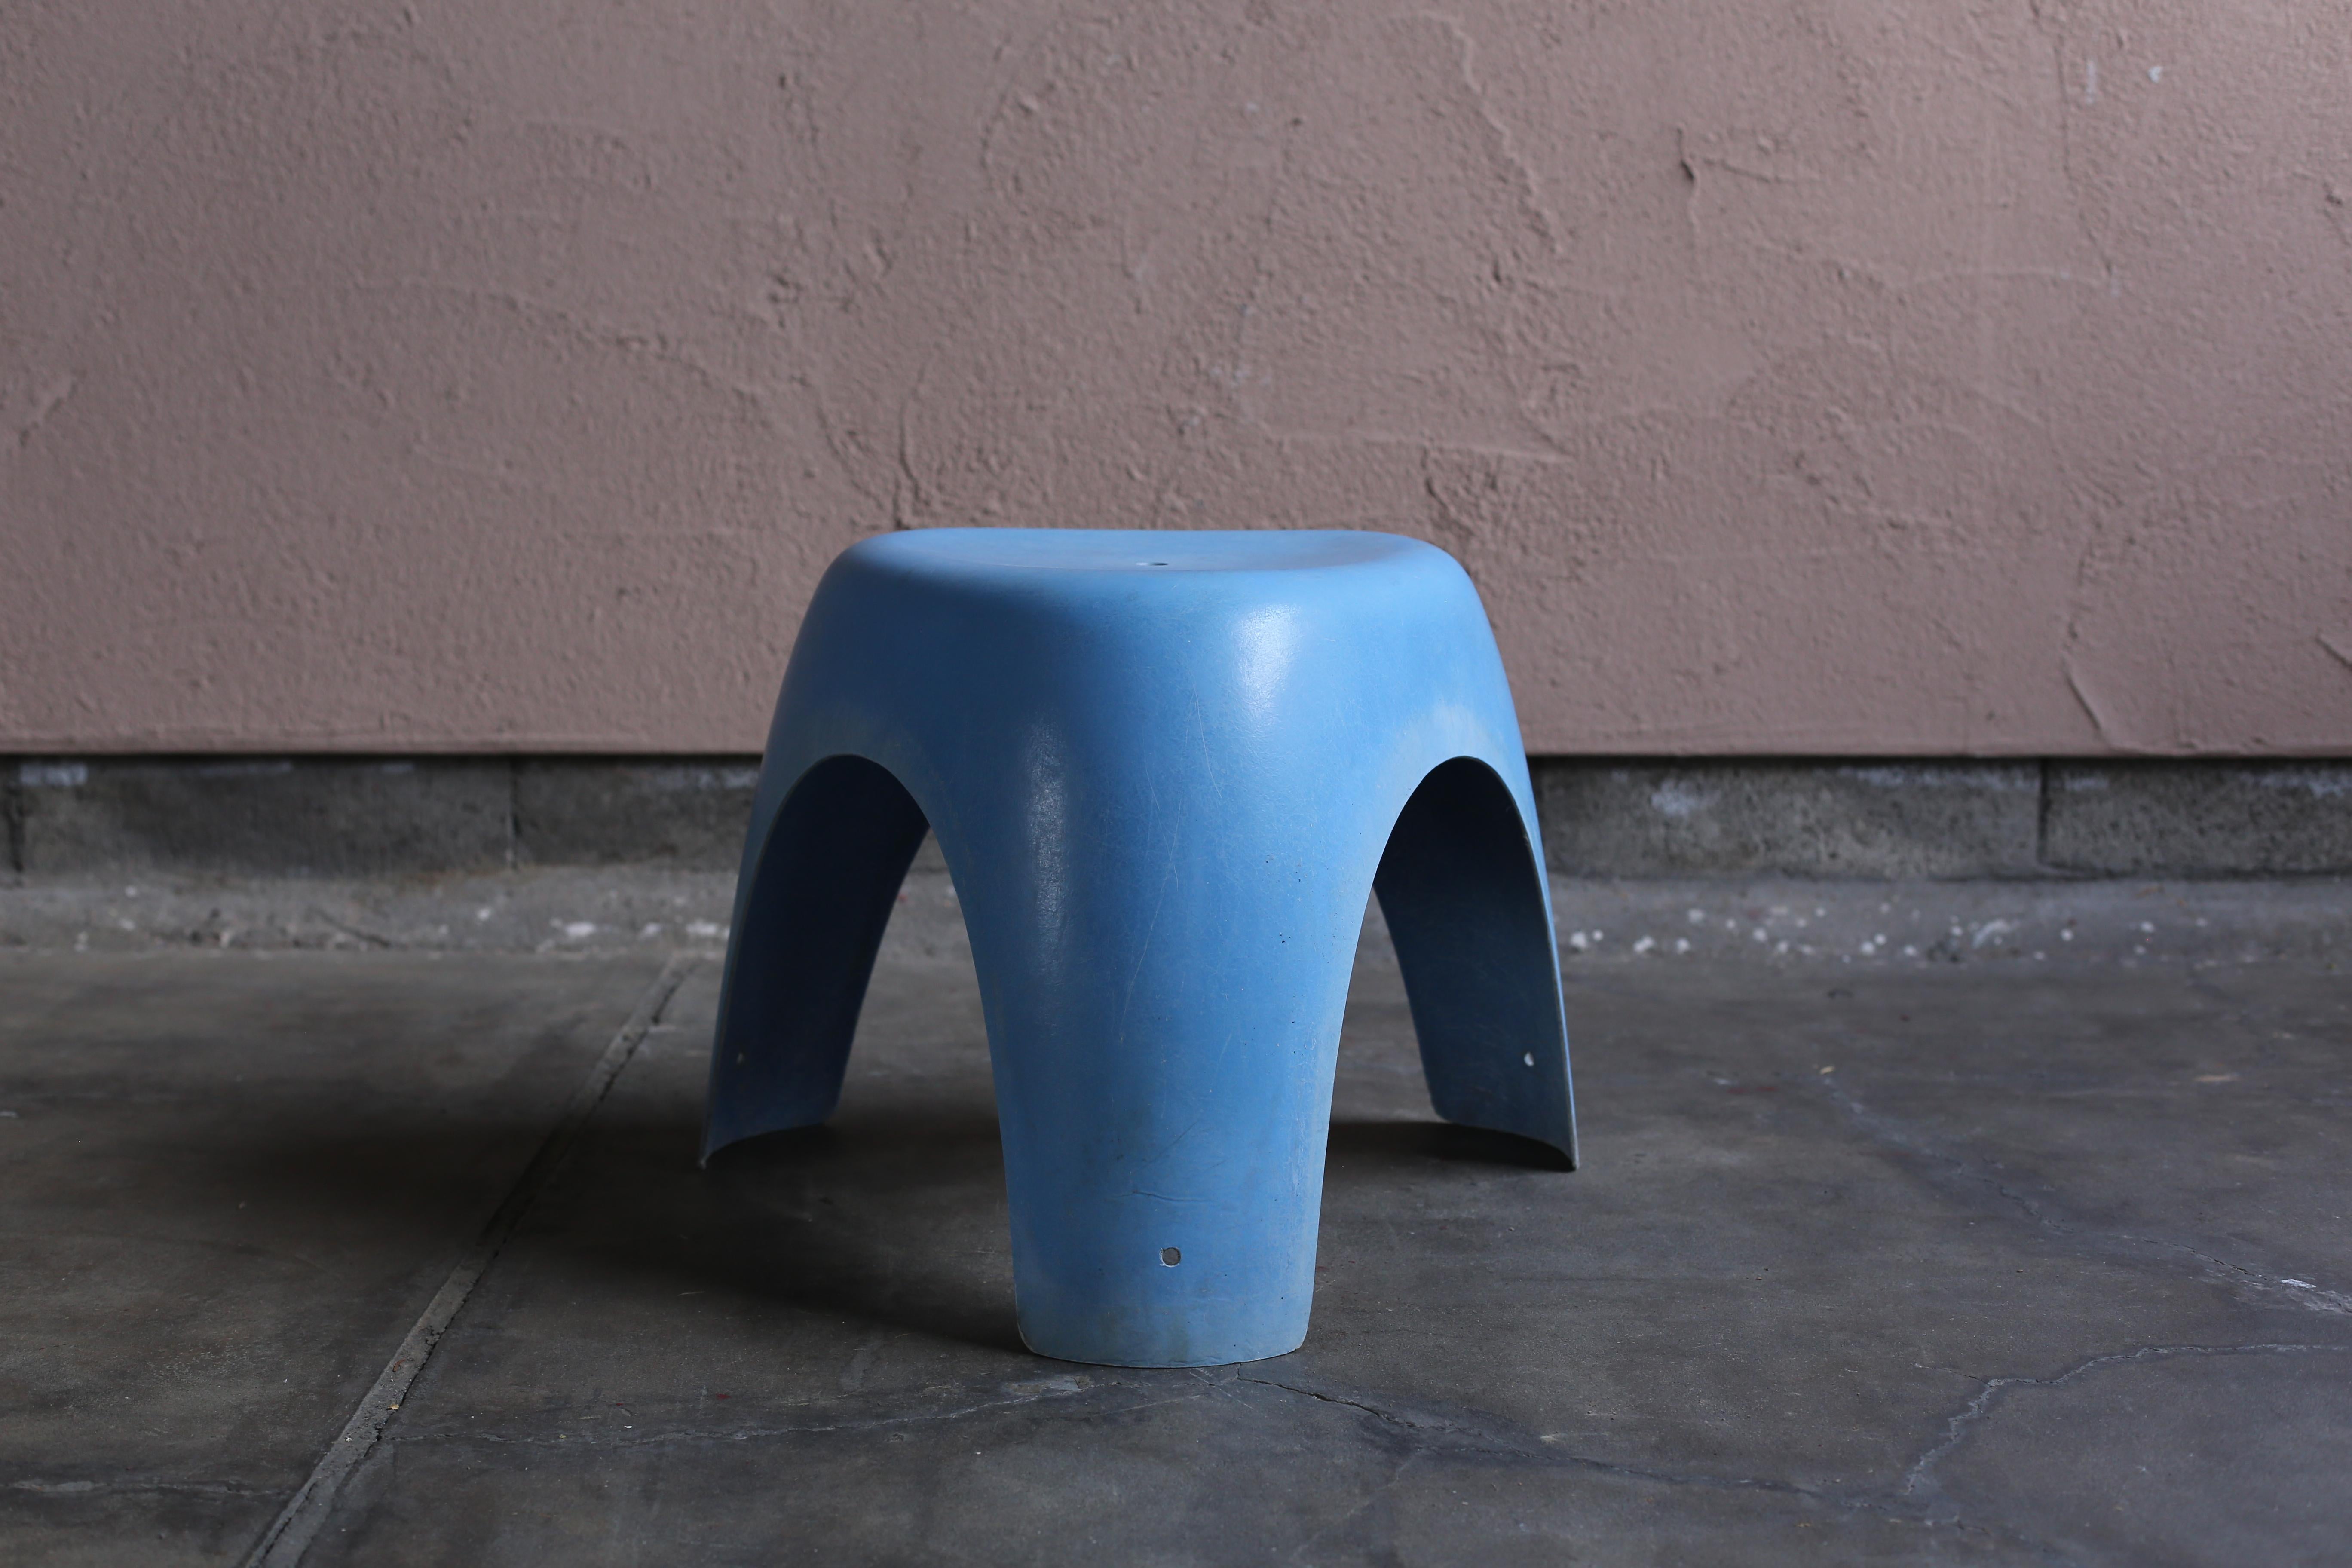 The Elephant Stool was designed by Sori Yanagi in 1954. This stool, which was released in 1956 with FRP material, which was rare at the time, was used in the pavilion at the 1970 Osaka Expo. Since then, it is a legendary stool that has received high